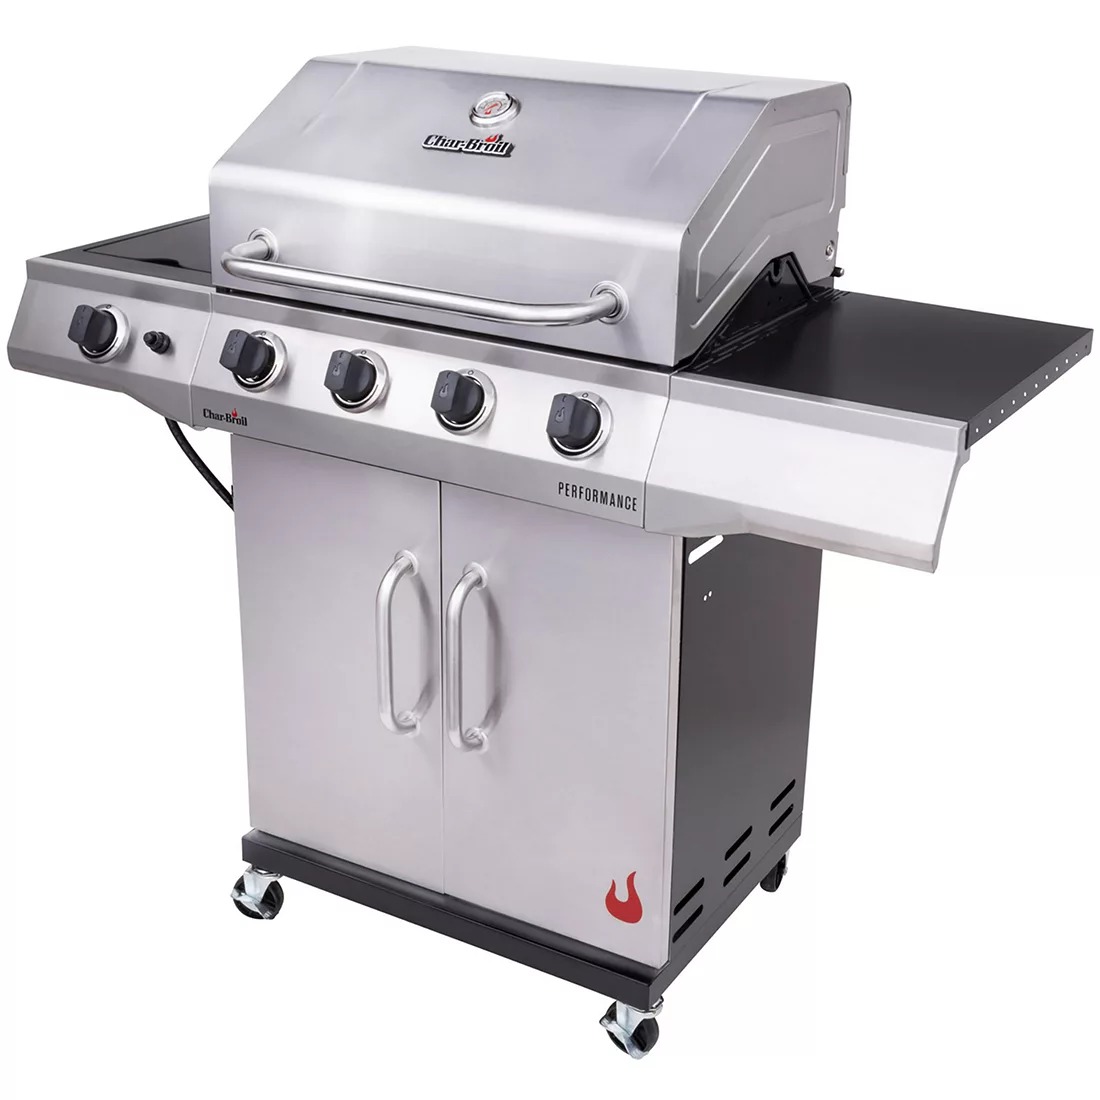 Char-Broil Performance Series 4-Burner Gas Grill with Soft Cover3